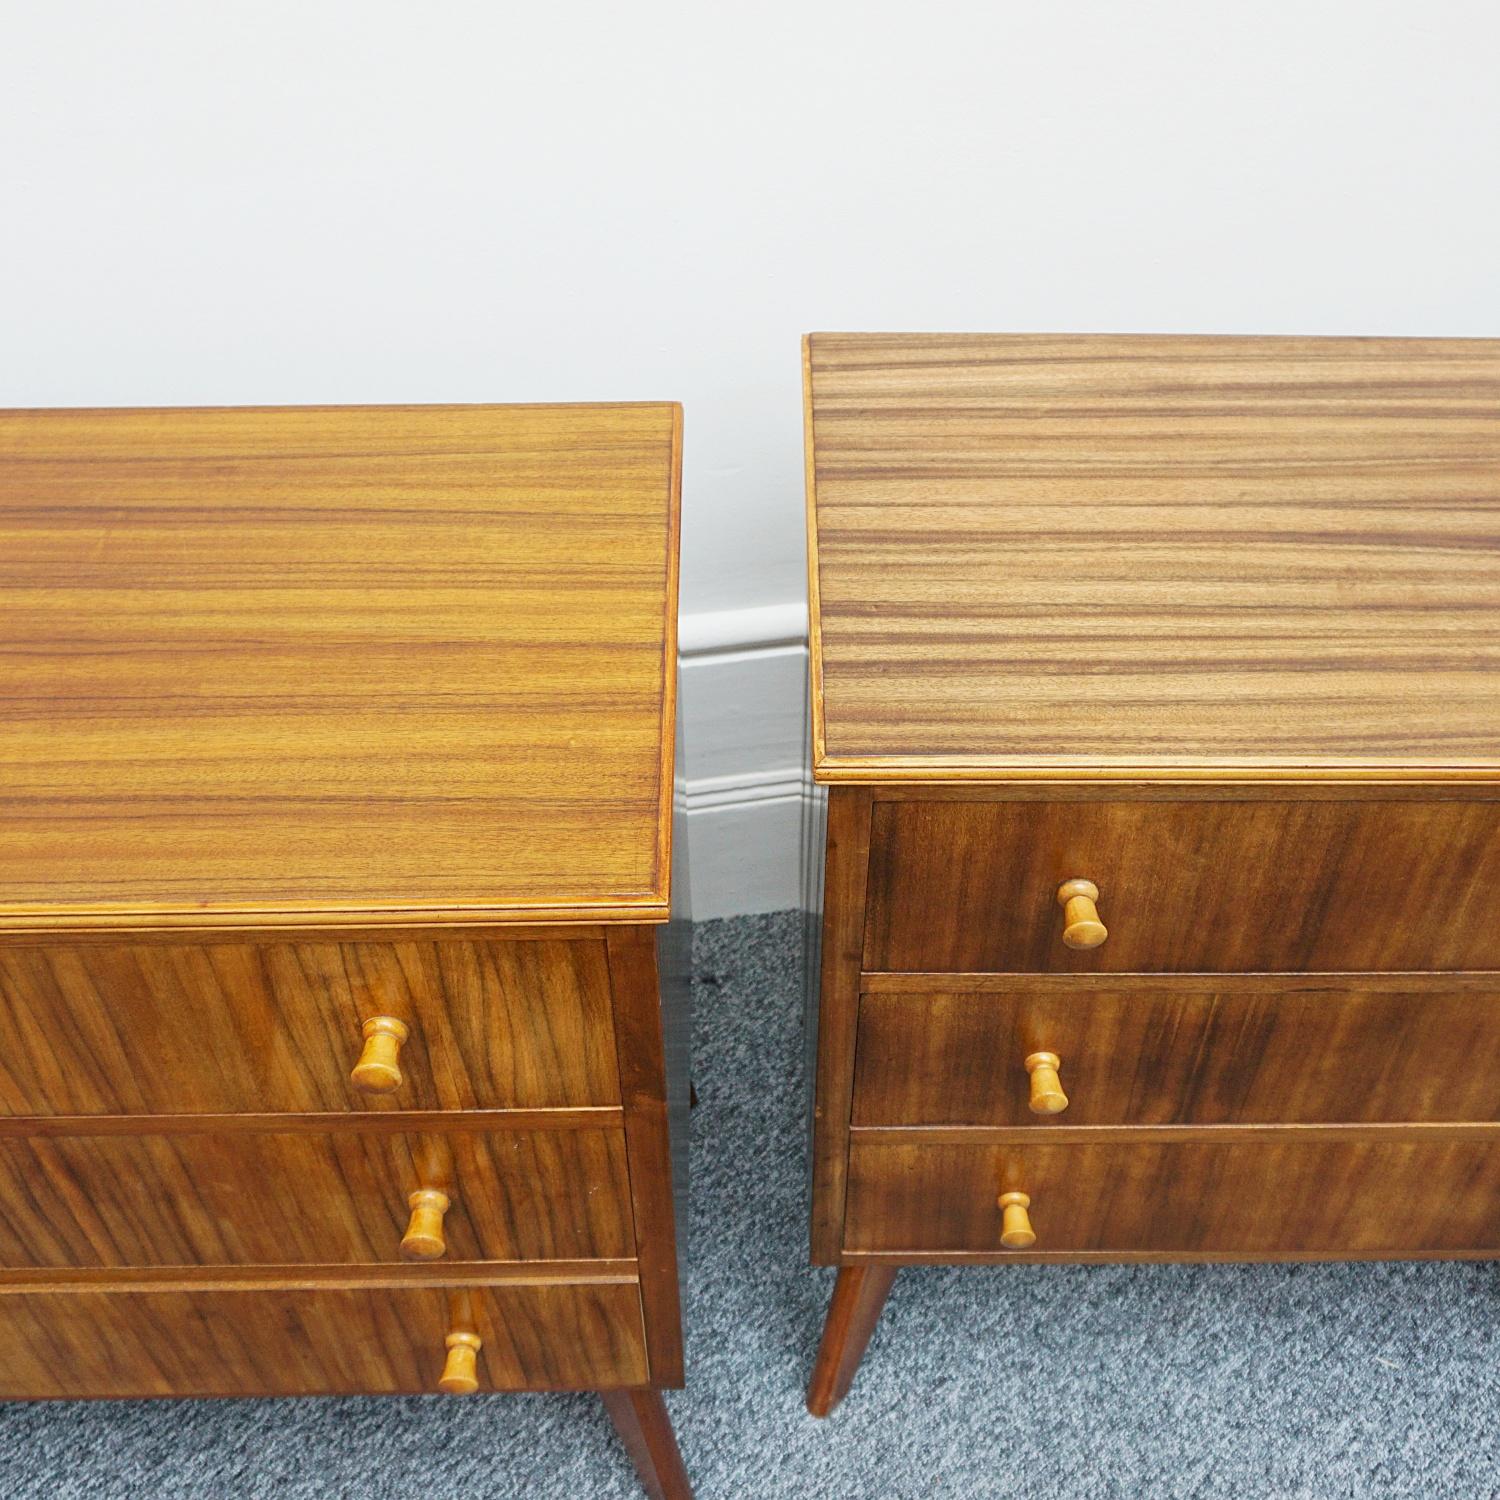 Sycamore Pair of Mid-Century Modern Chests of Drawers circa 1950